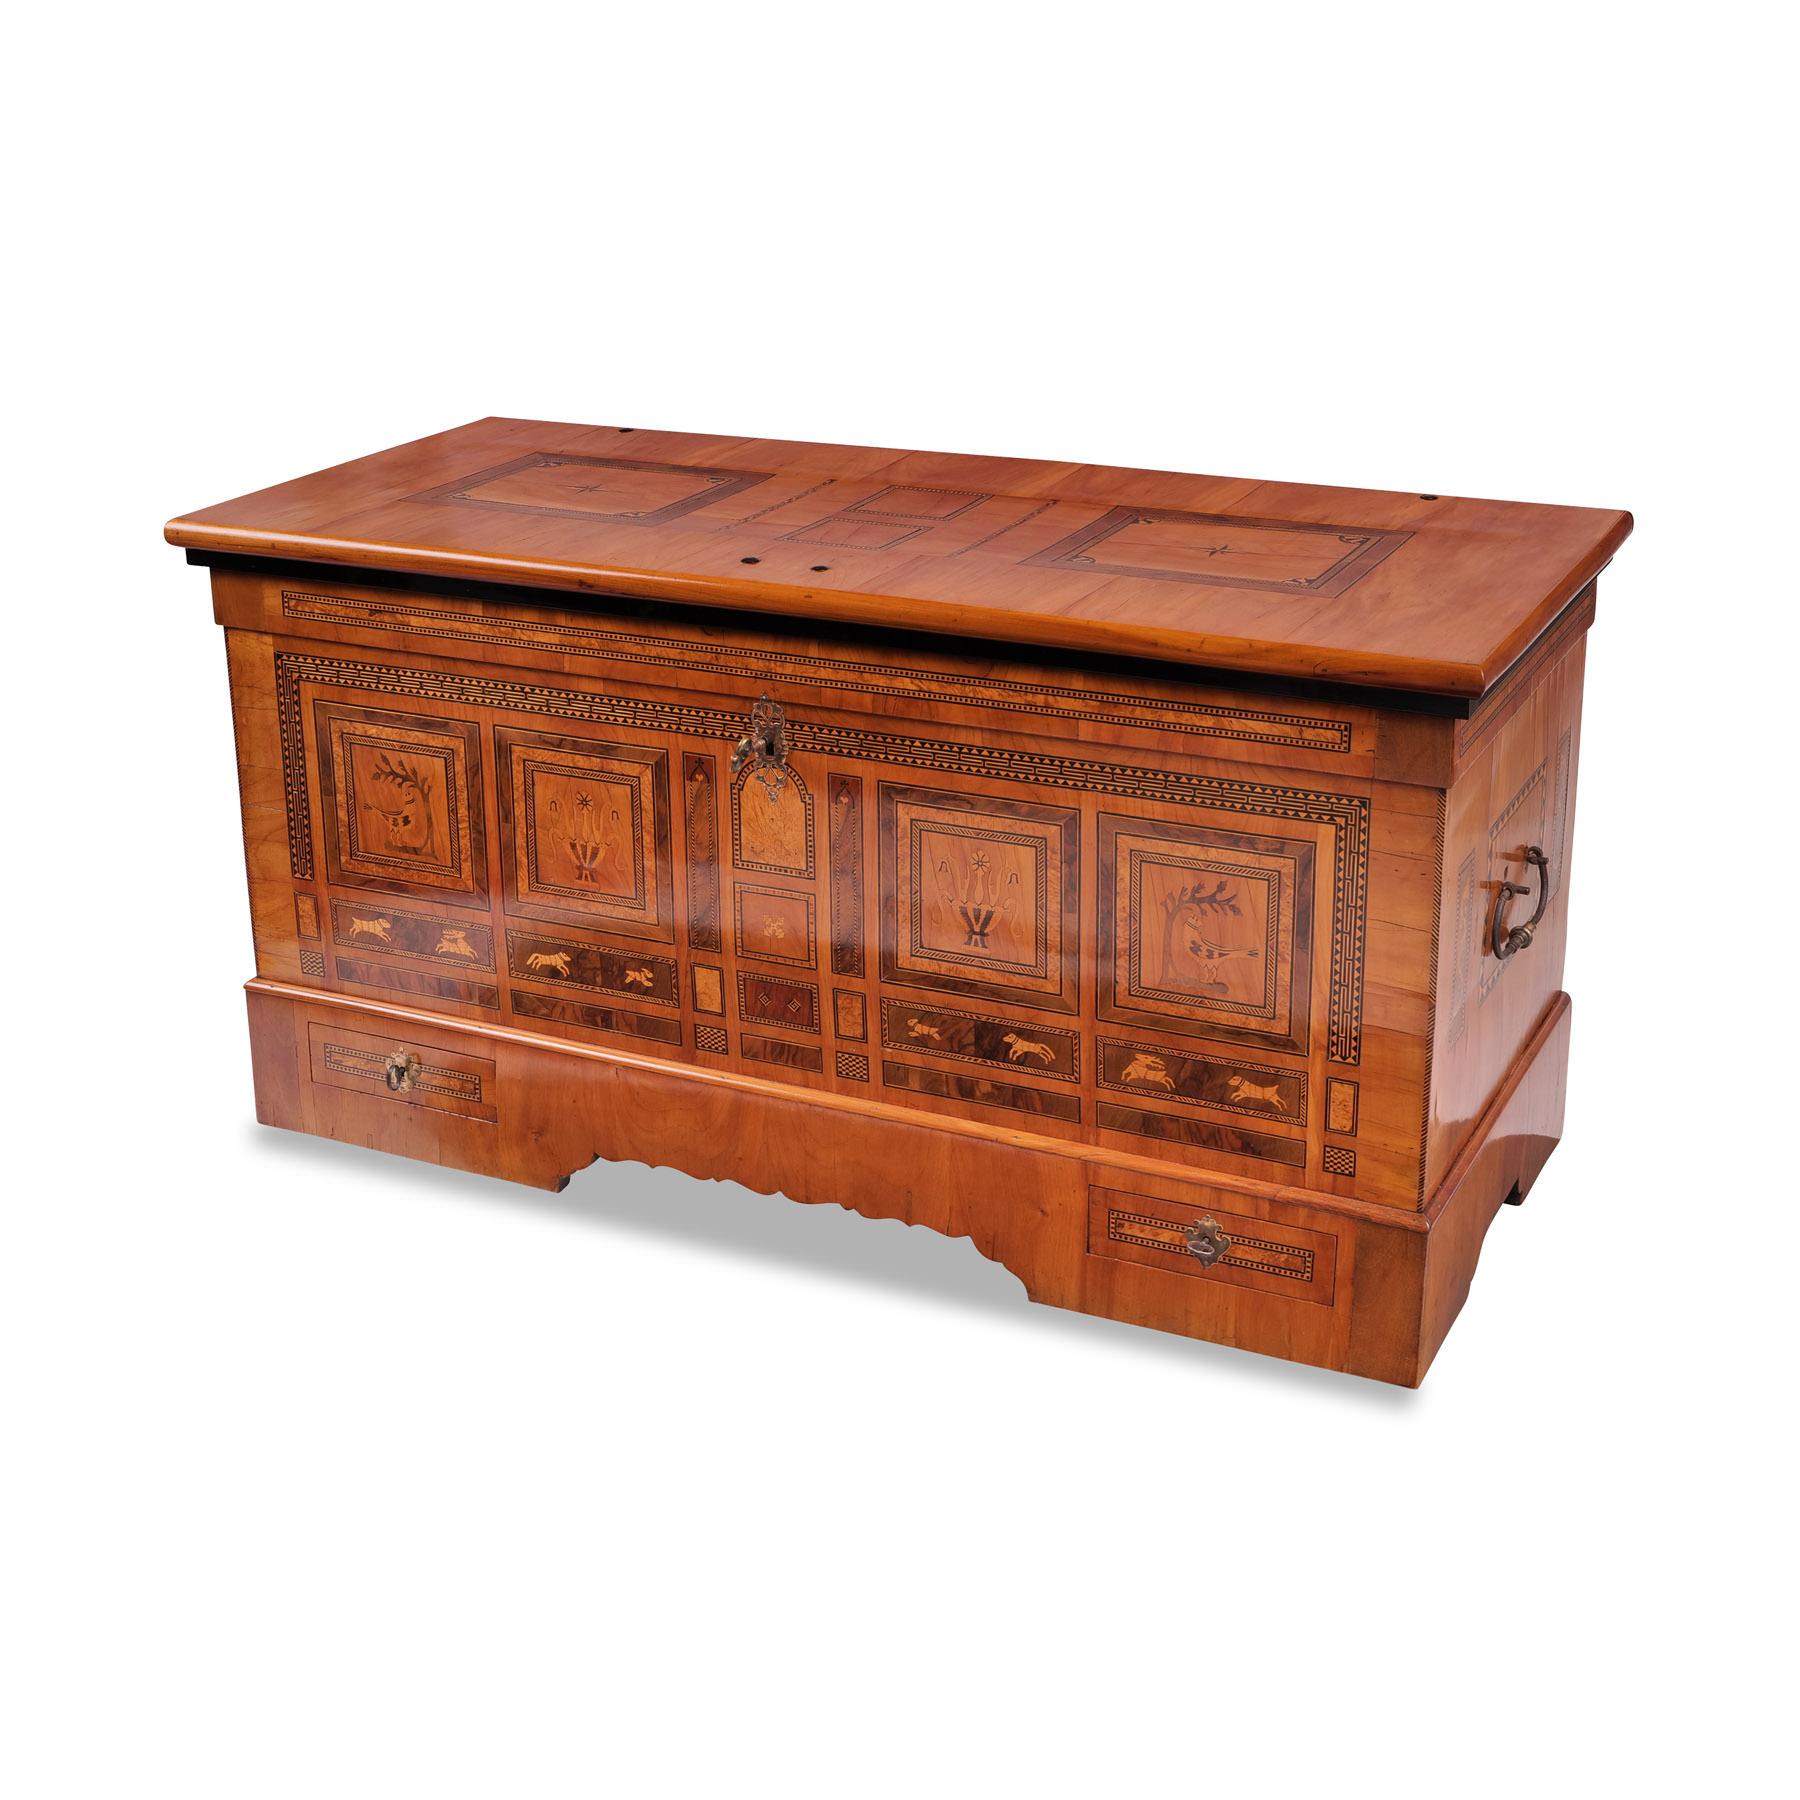 Marburg finch chest
Biedermeier around 1800/10, cherry wood and other precious woods richly veneered and marquetry on an oak body, hunting motif, 2 small drawers in the base area, original lock and fittings, handles on the sides, restored condition,